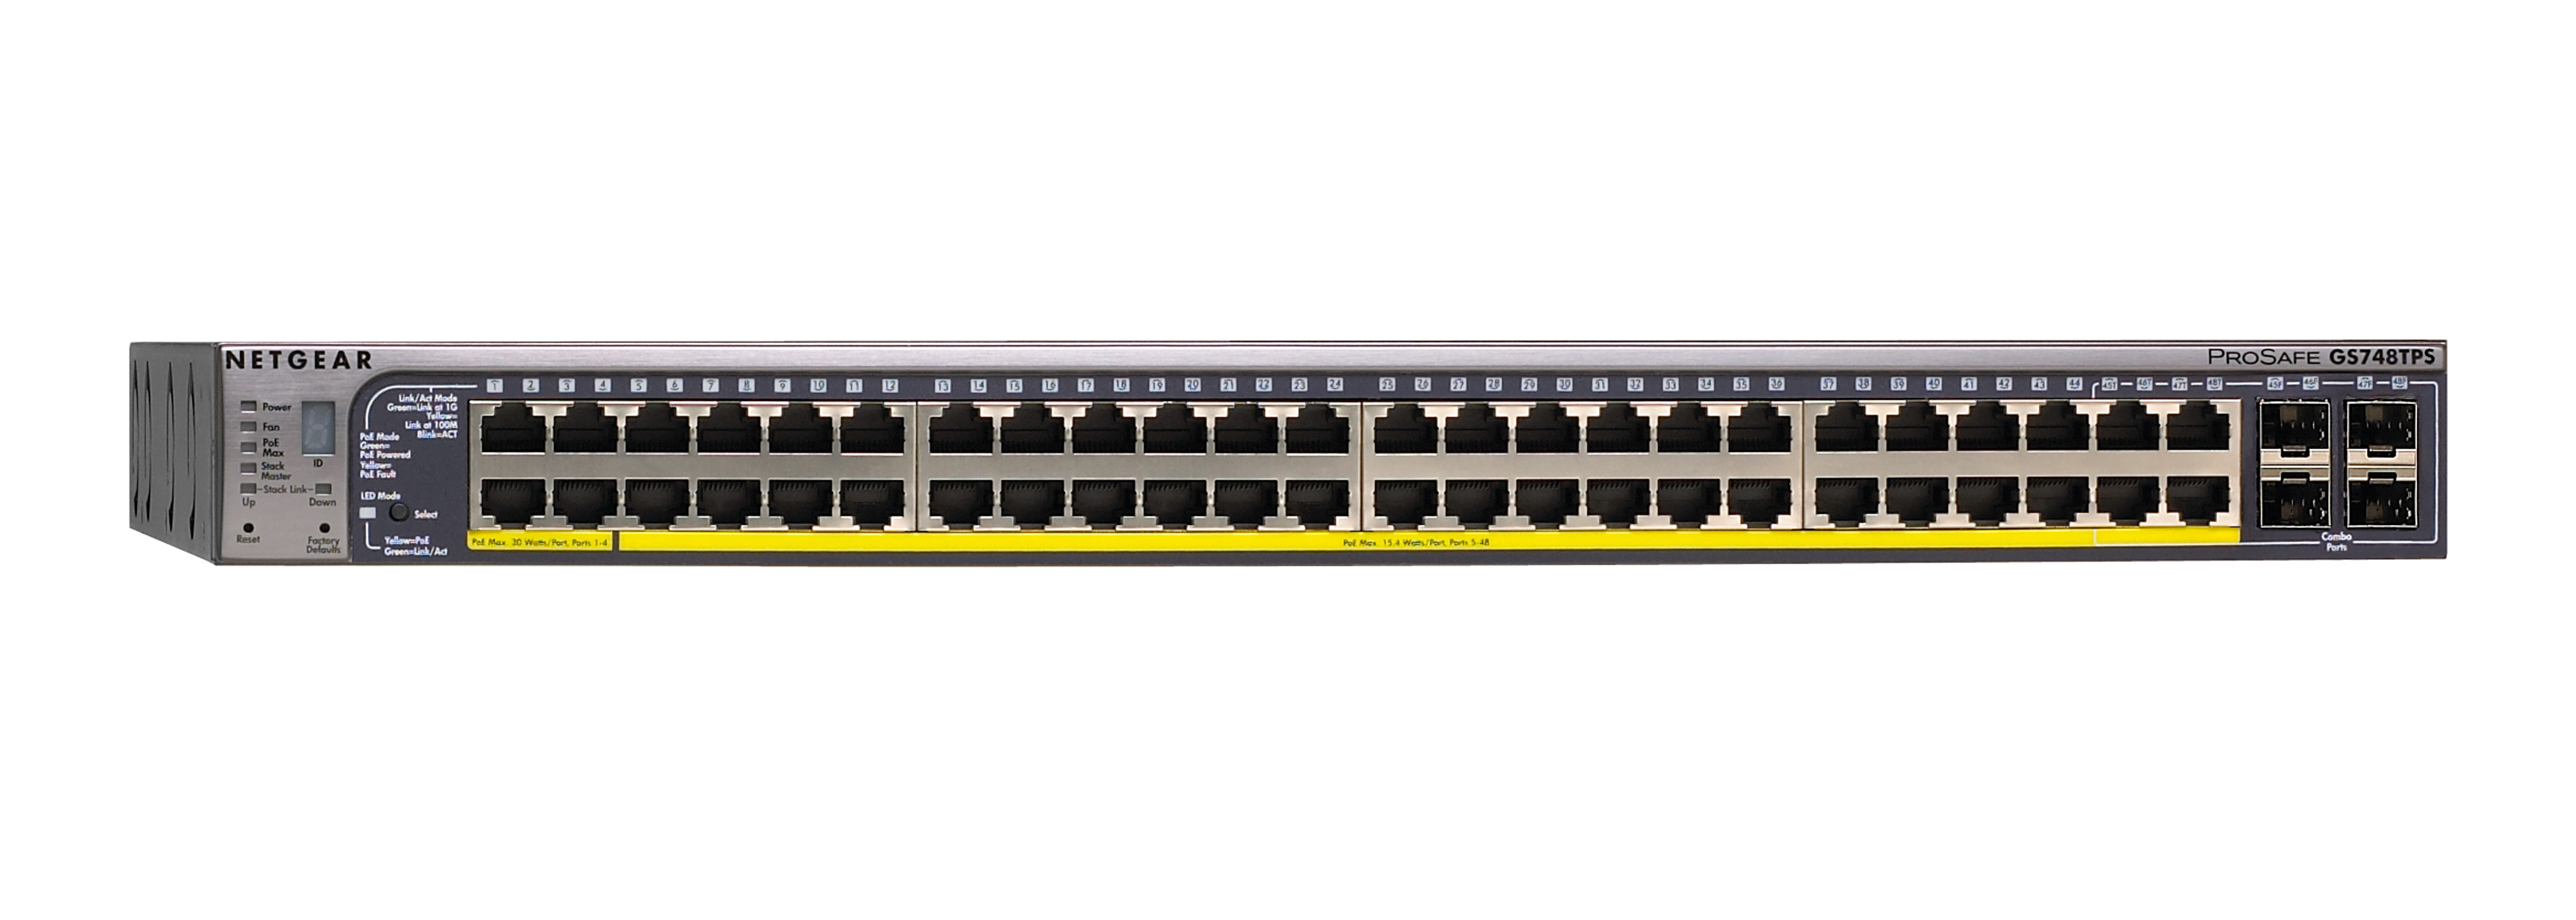 clipart network switch - photo #39